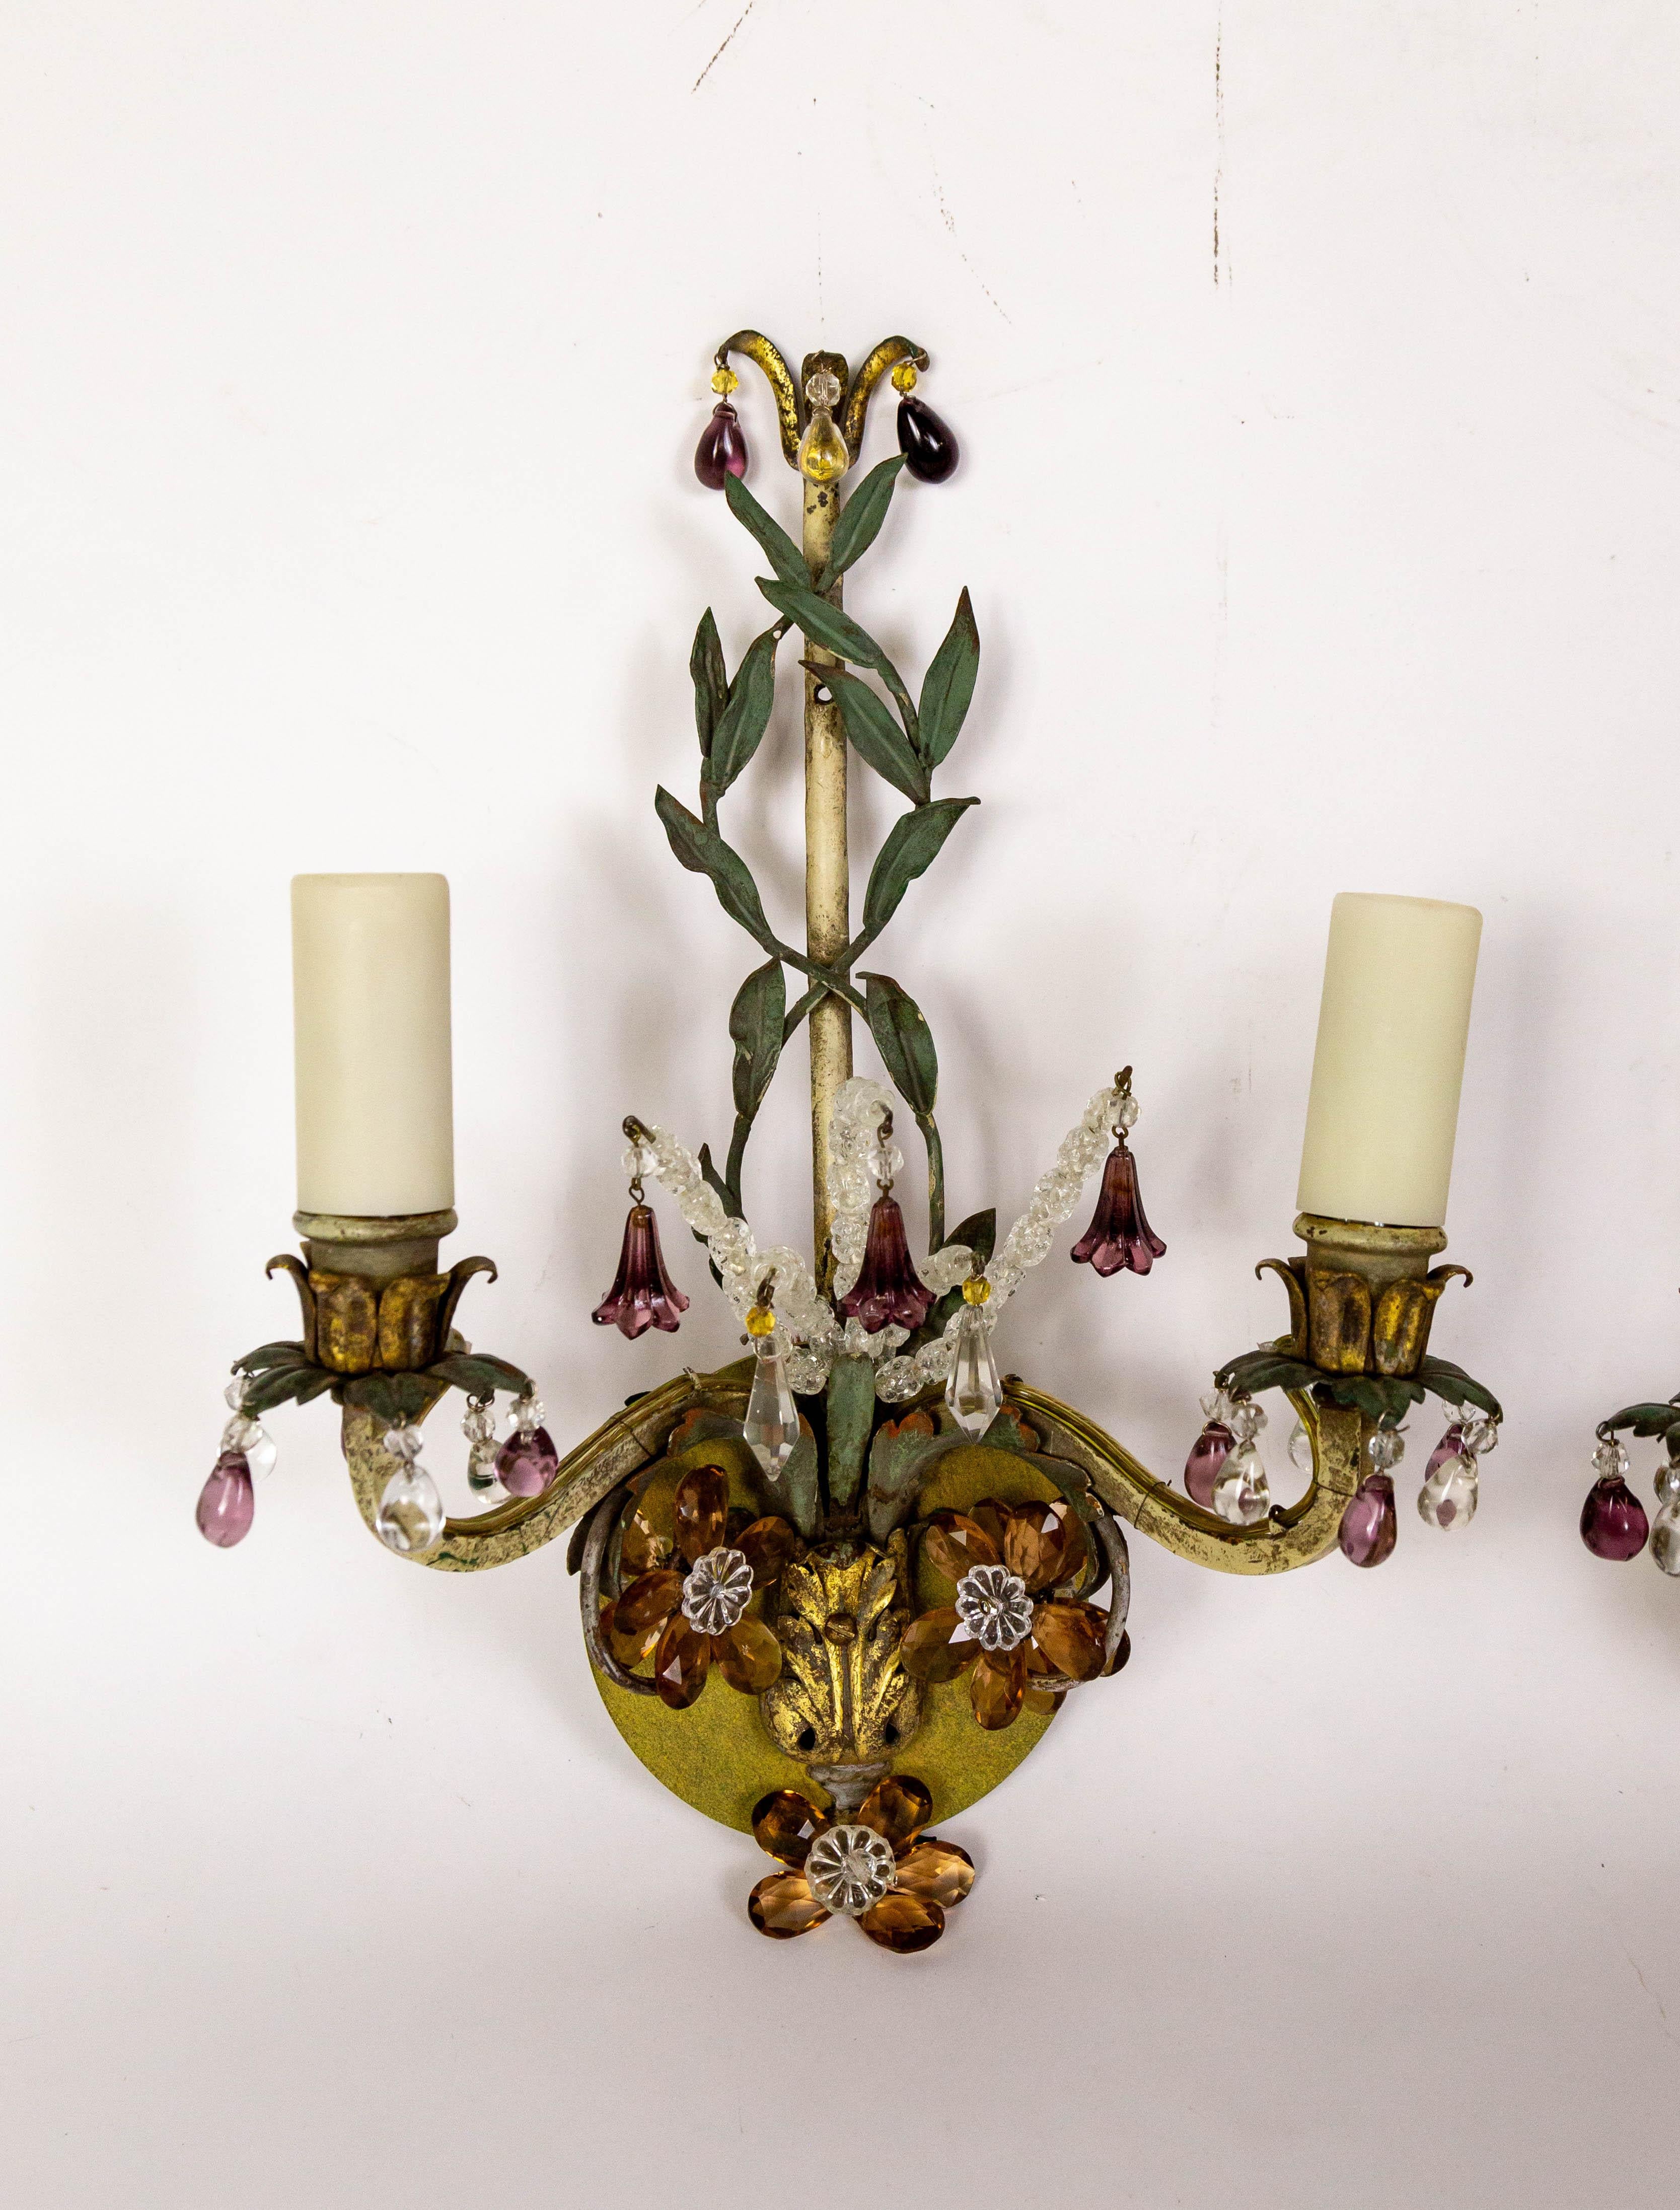 This pair of elegant, 2-arm, polychrome candelabra sconces with various finishes-green, gold, white gold, and brass, were created in the early 20th century.  The structure has intertwining green vines and is adorned with amethyst, clear, and amber